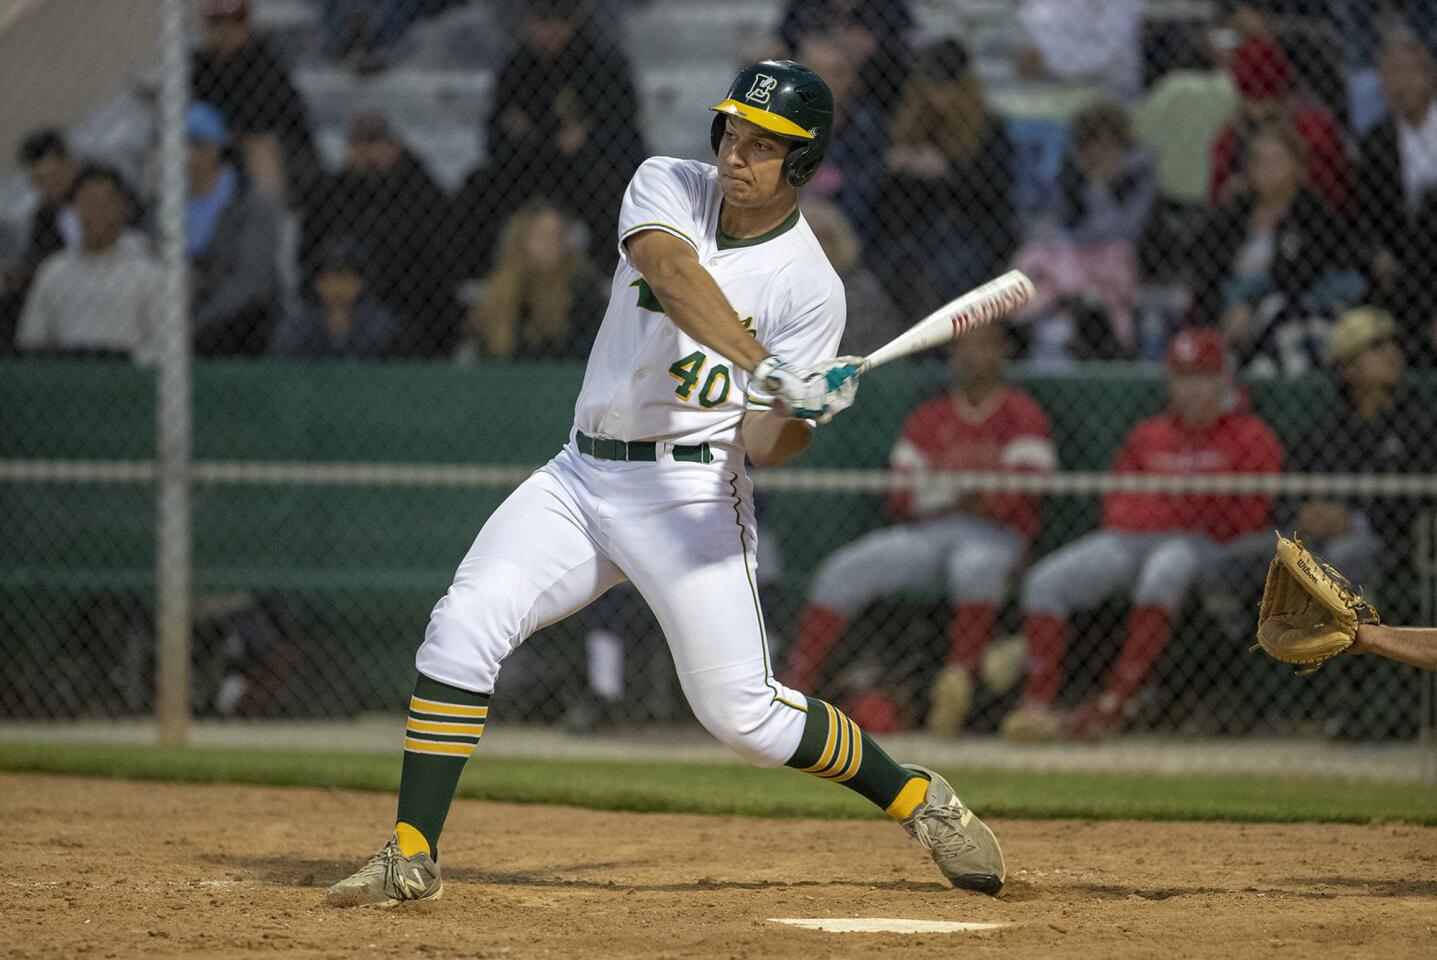 Edison's Matt Swartz hits for the South during the Kiwanis Club of Greater Anaheim's 52nd Orange County High School All-Star Baseball Game for seniors at La Palma Park's Dee Fee Field in Anaheim on Tuesday.